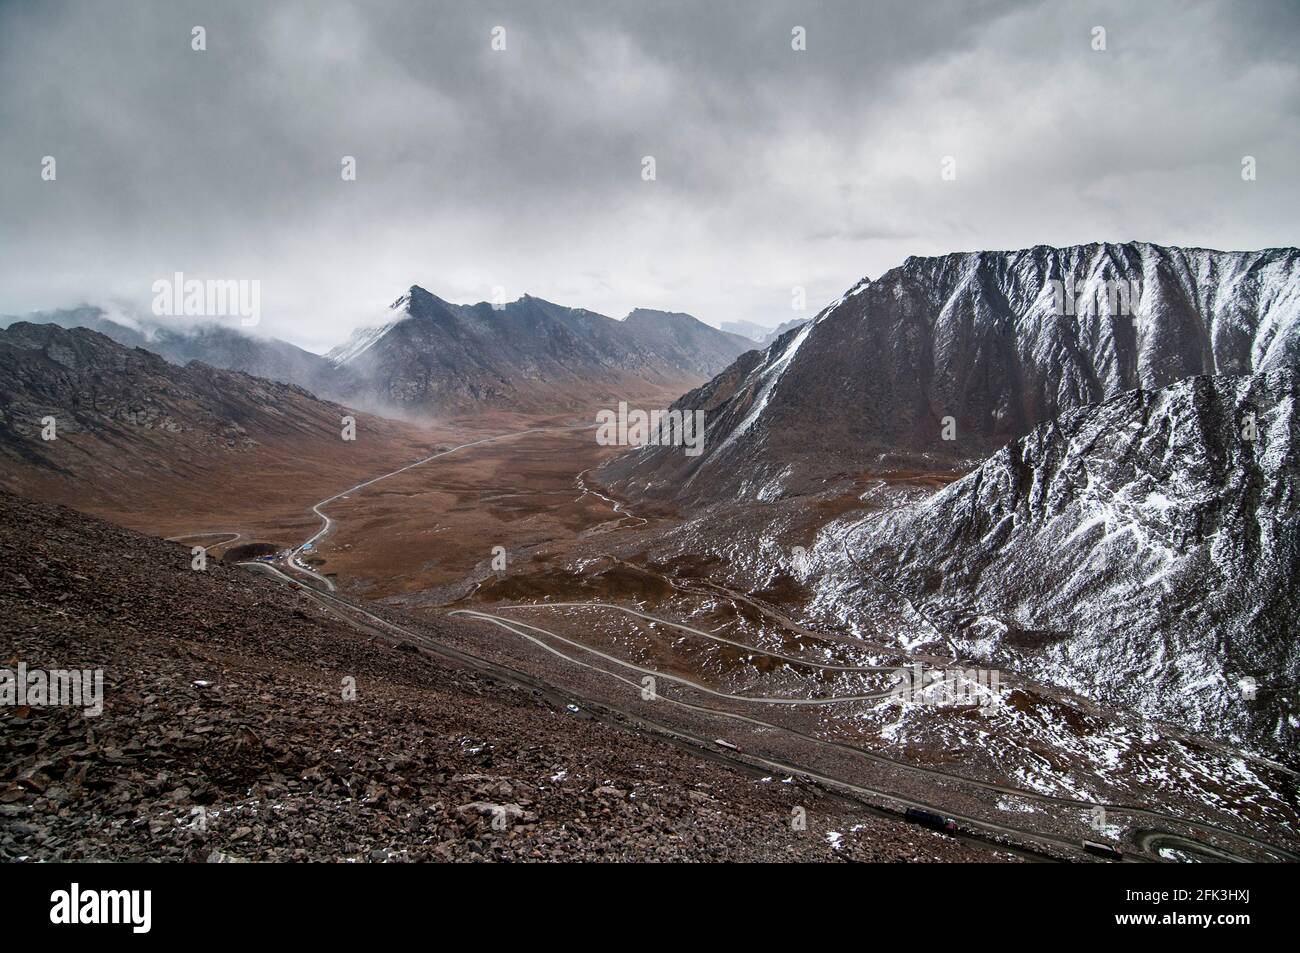 A cold weather front moves across the mountains along the G216 Highway connecting Urumuqi to the Bayingolin Prefecture across the Tianshan mountains in Xinjiang, China, PRC. © Time-Snaps Stock Photo